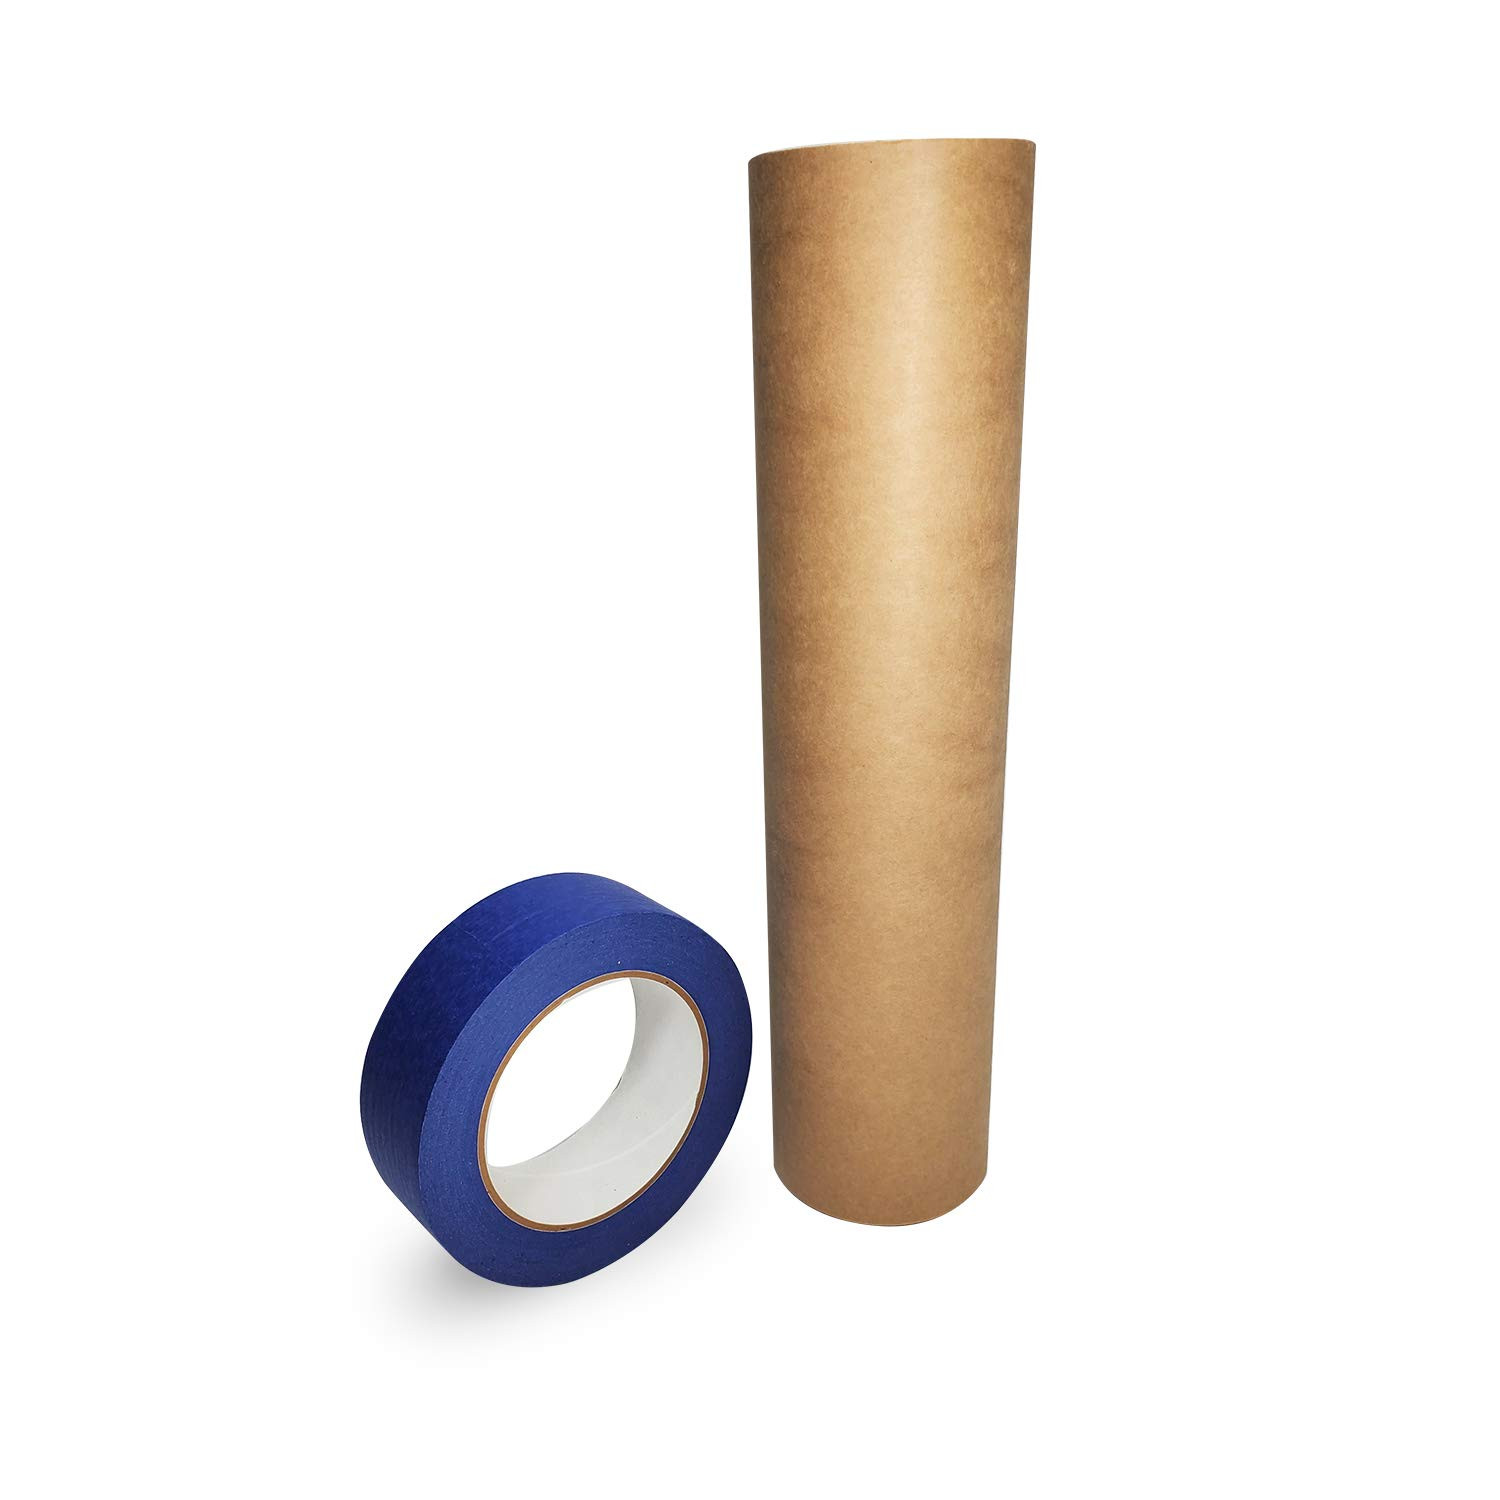 Masking Paper Set of 9, 12 and 18 Brown Masking Paper Rolls (60-yard  Long) for Protection from Water-Based Materials buy in stock in U.S. in IDL  Packaging